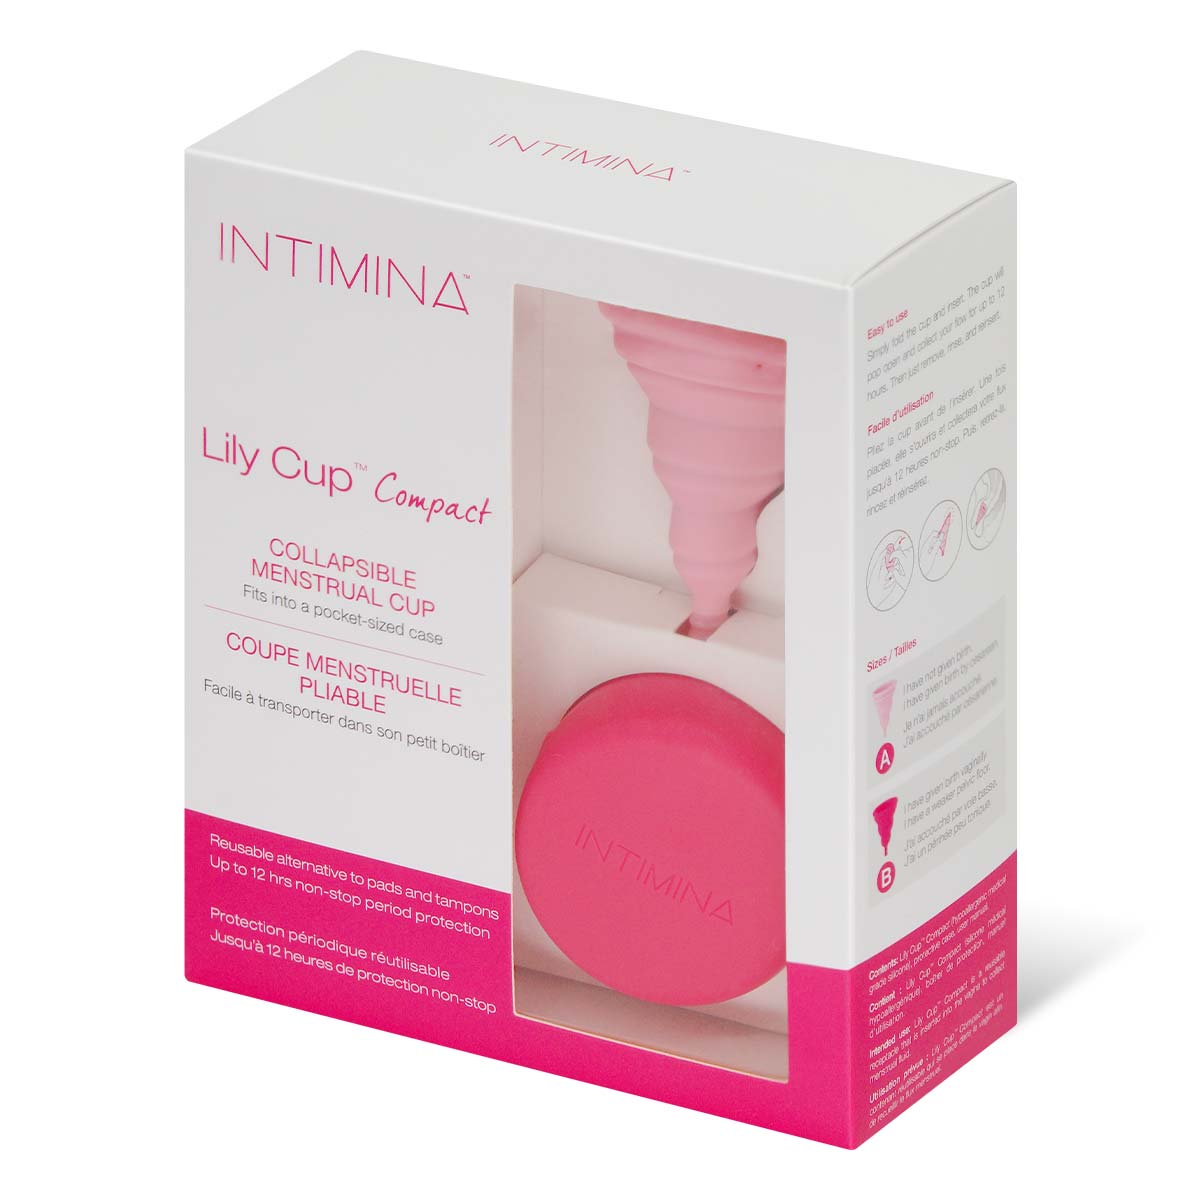 Intimina Lily Cup Compact Collapsible Menstrual Cup (Size A)-p_1